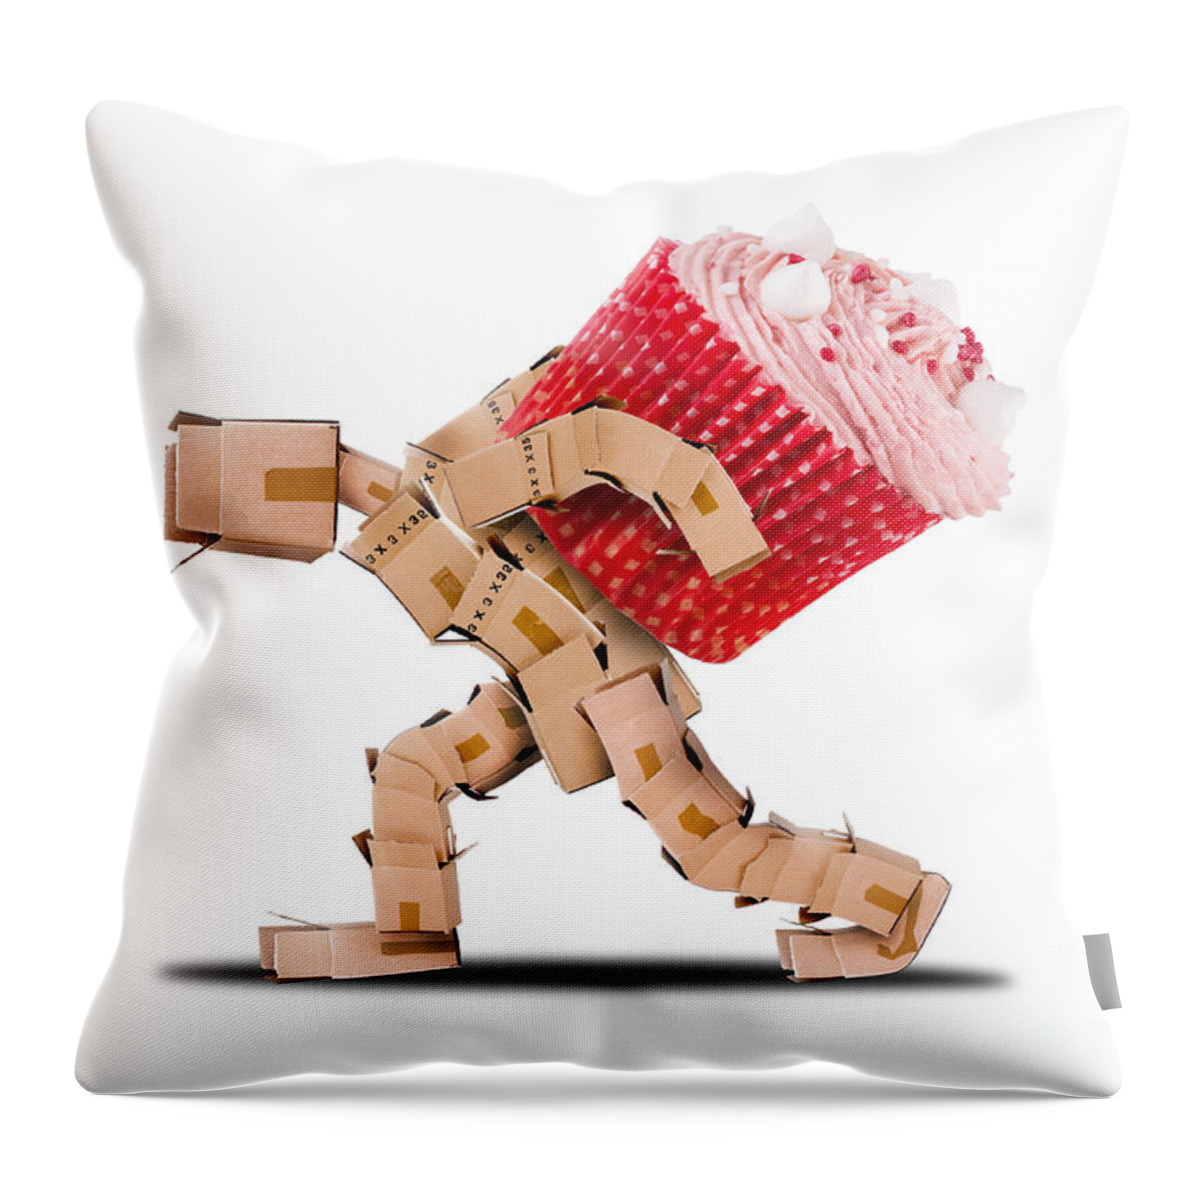 Cake Throw Pillow featuring the digital art Box character carrying a massive cupcake by Simon Bratt